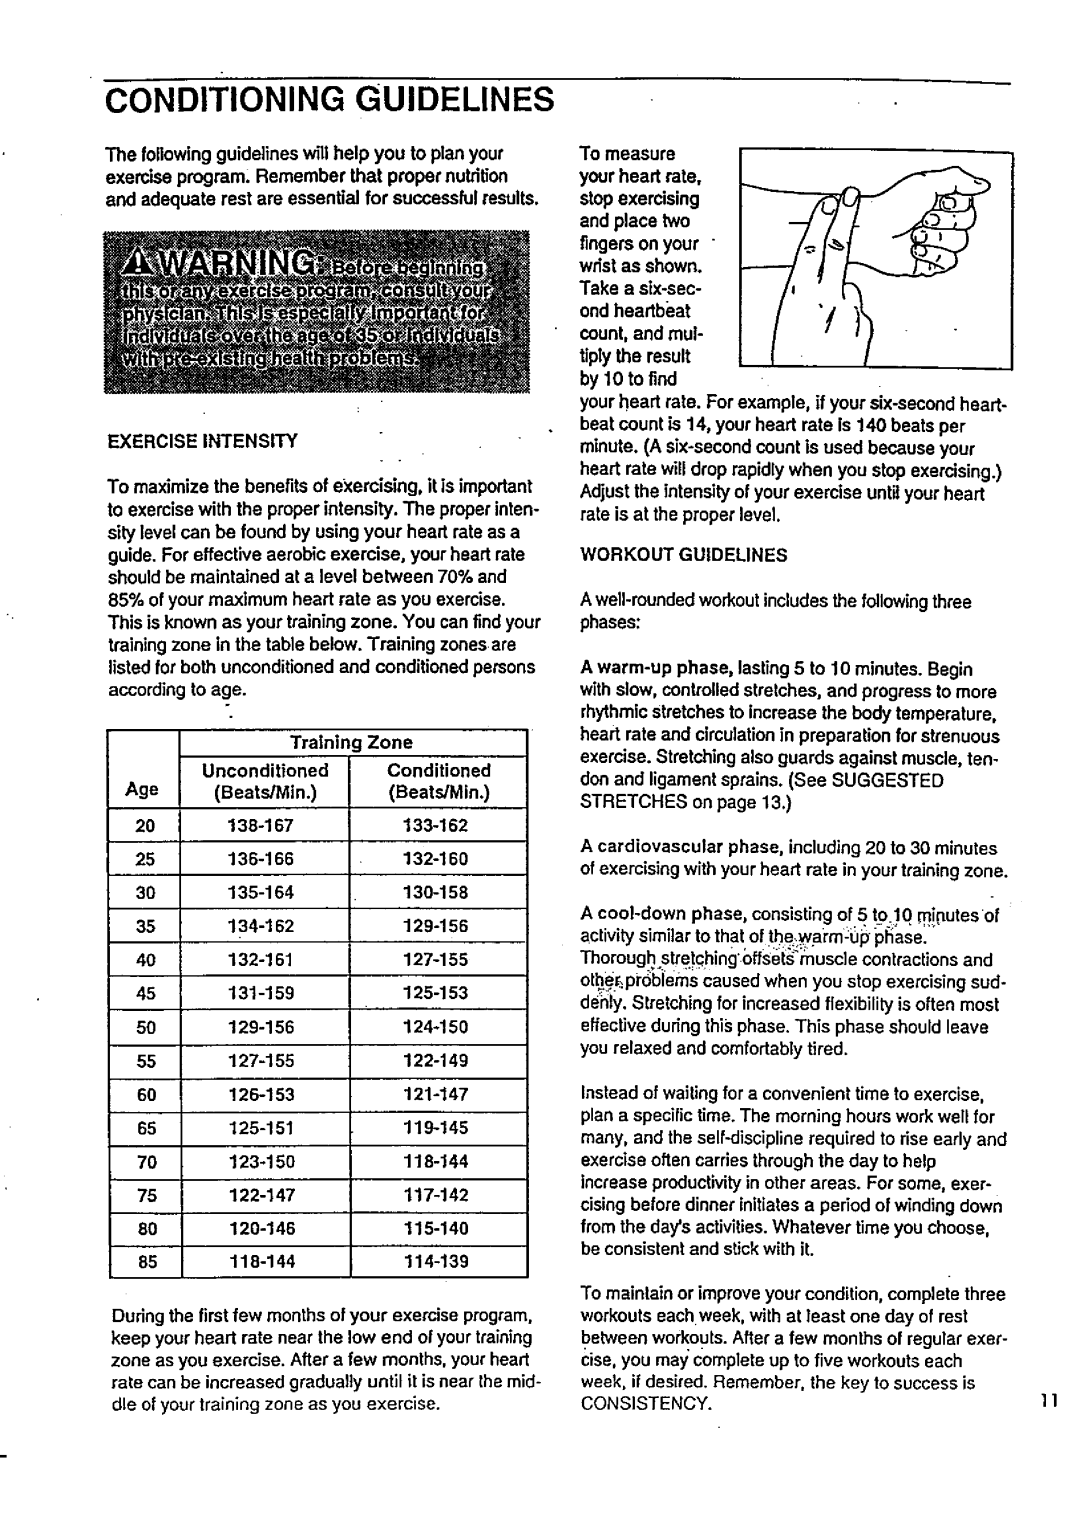 Sears 831.29723 owner manual Conditioning Guidelines, Workout Guidelines 